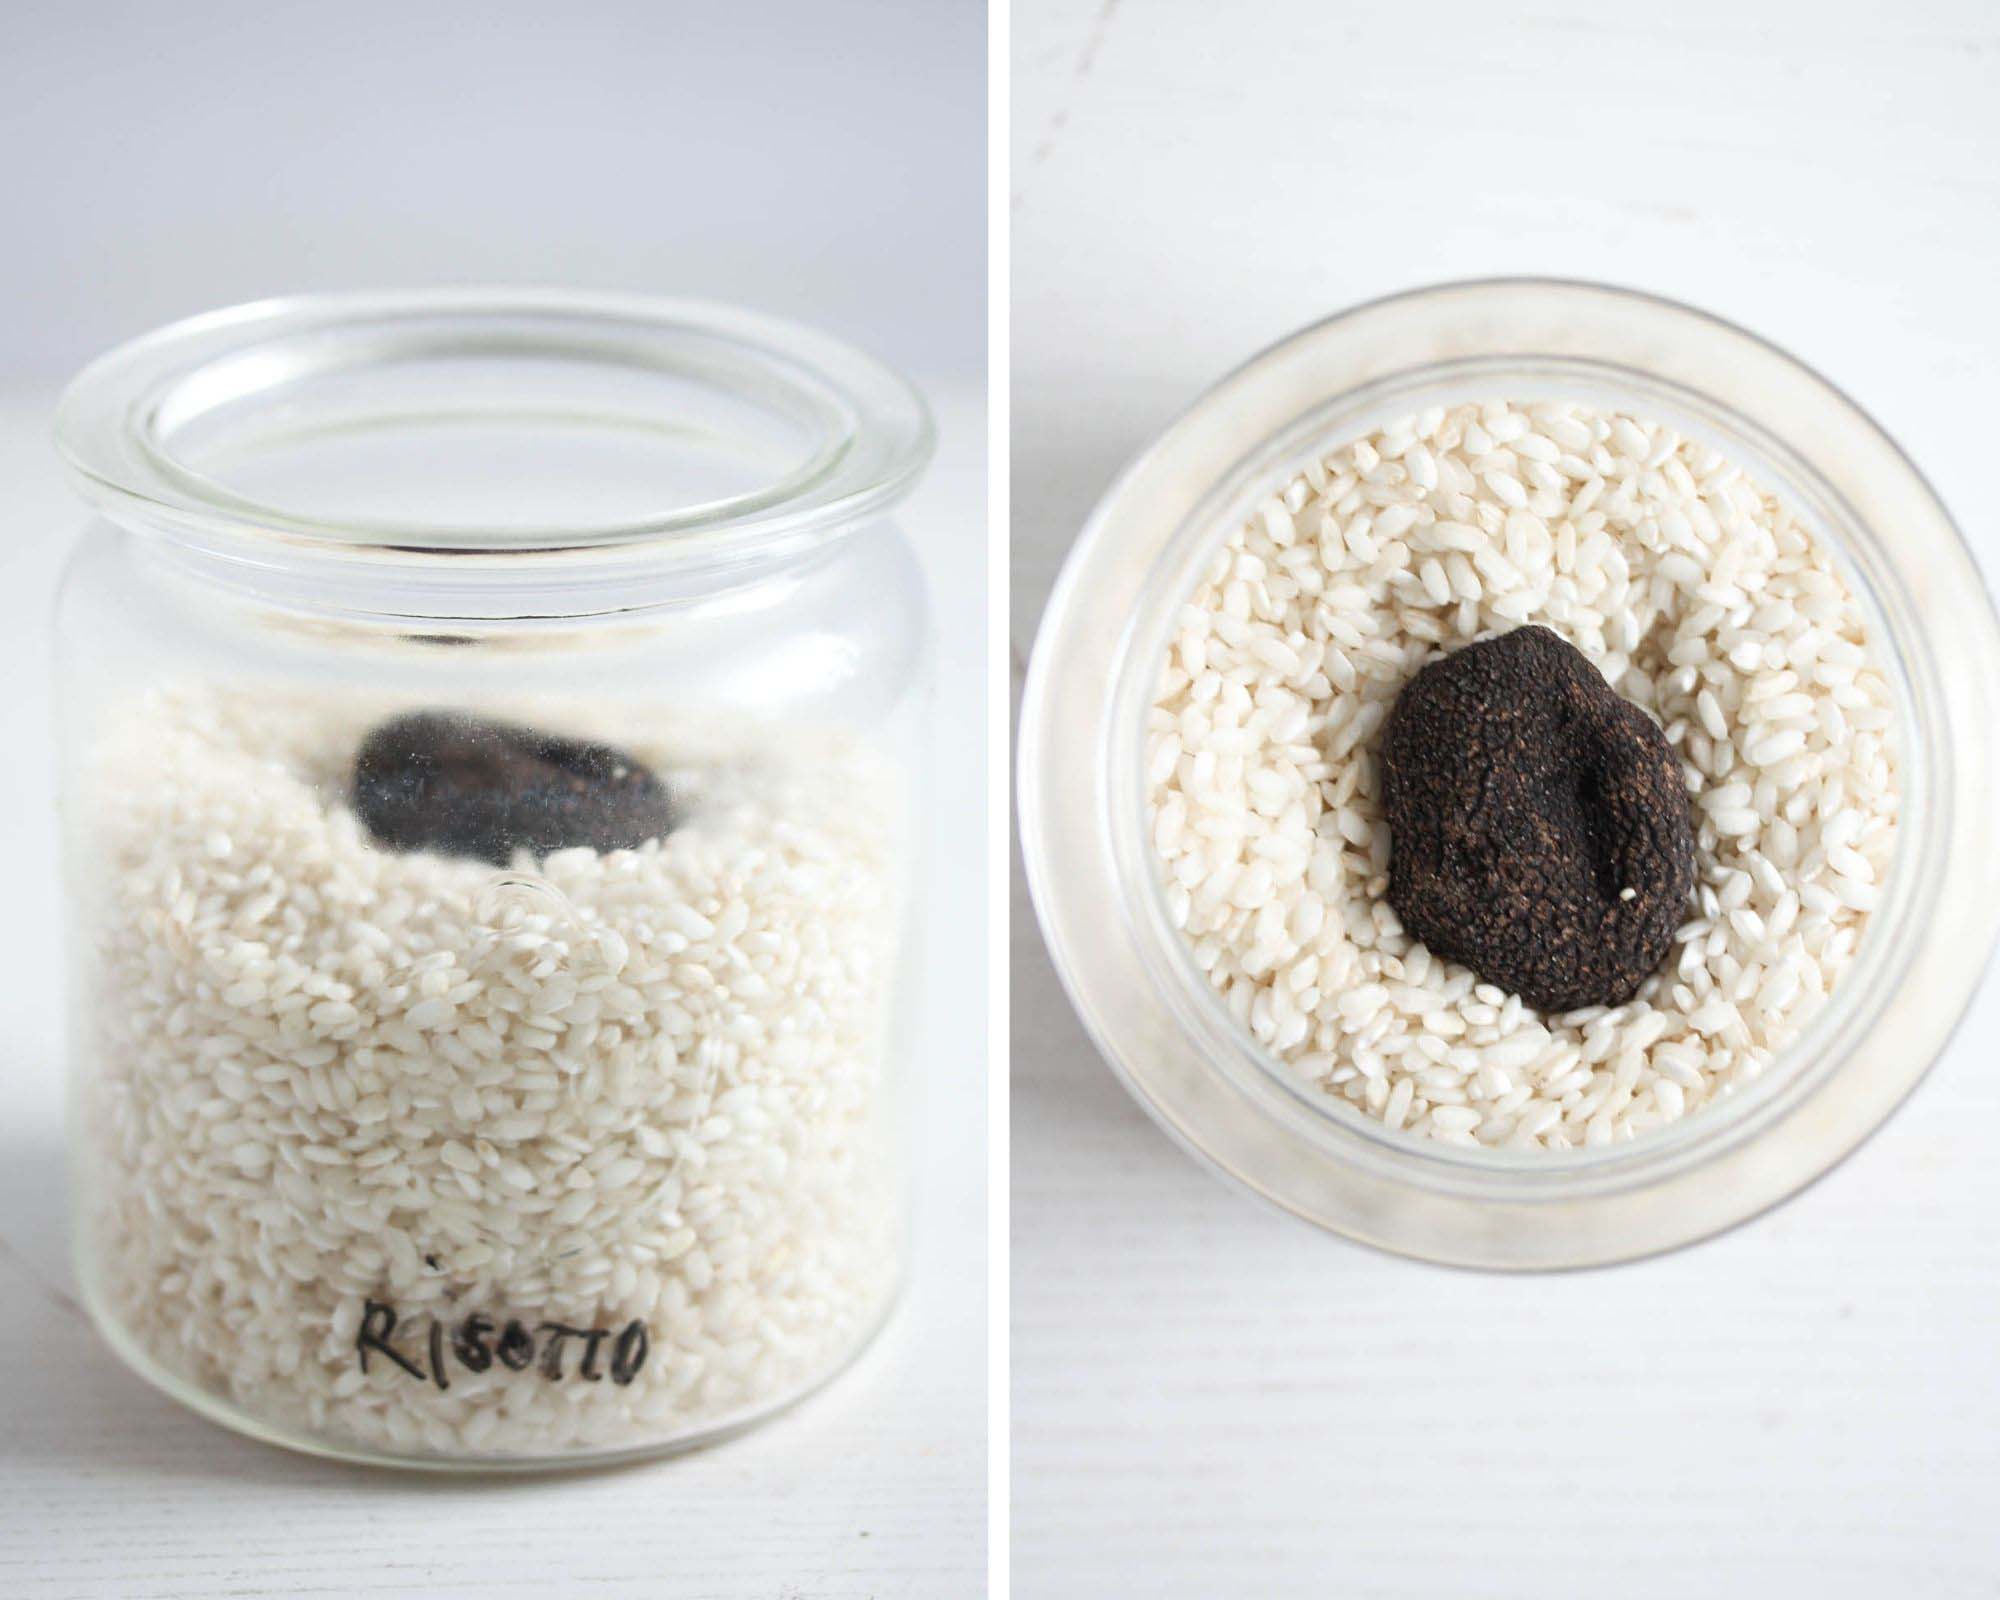 black truffles stored in a jar of raw risotto rice.